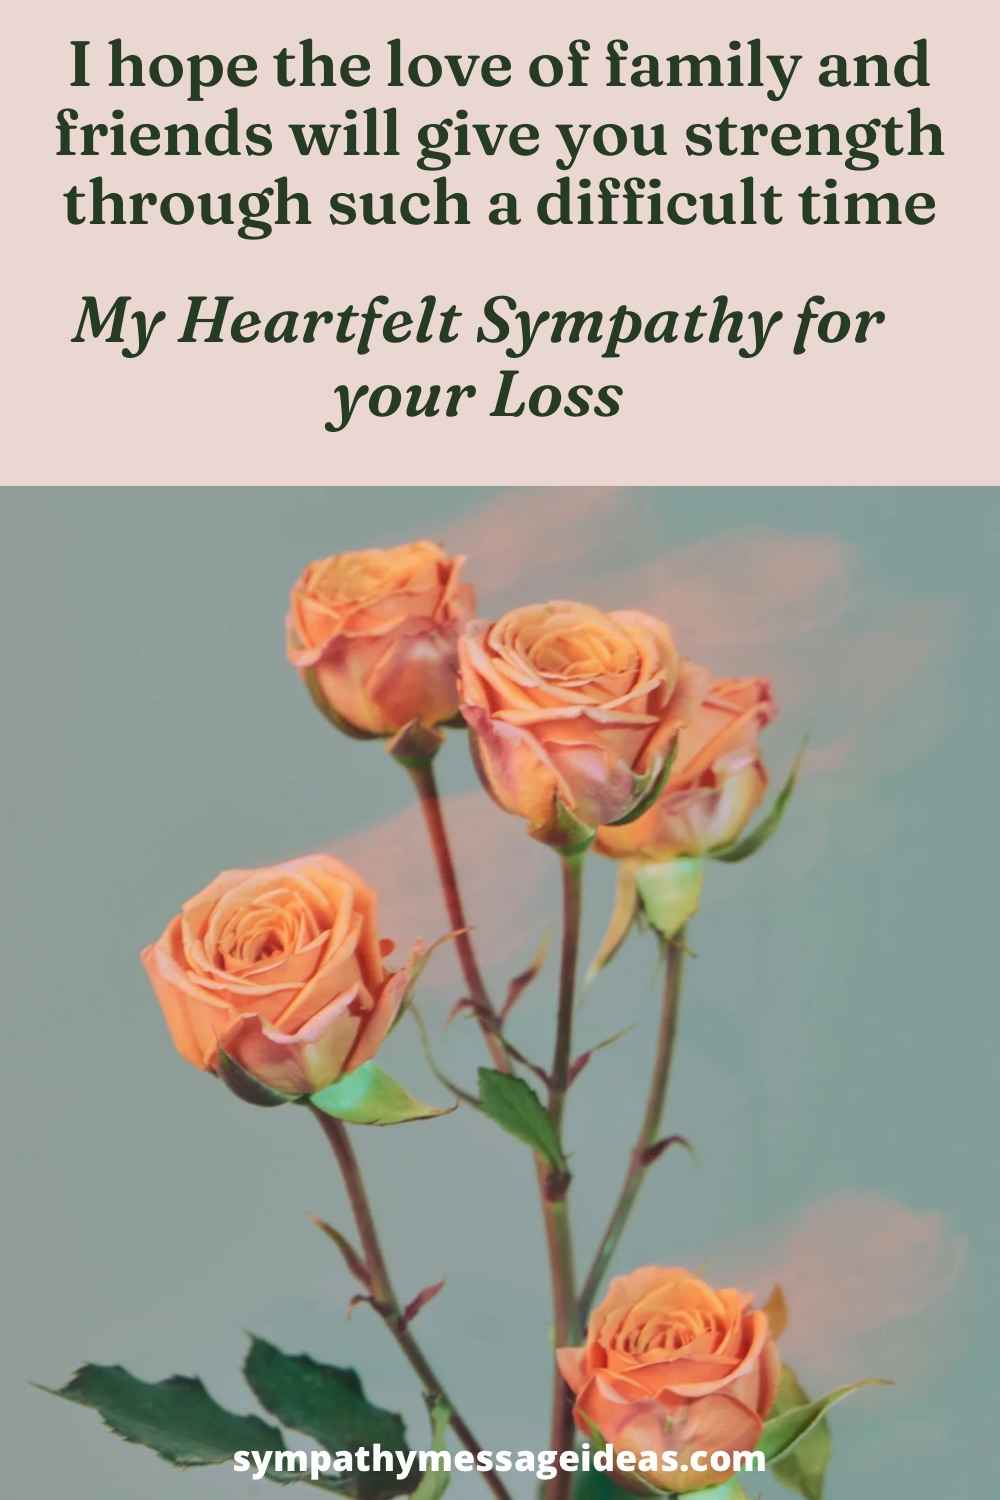 heartfelt sympathy for loss of a loved one